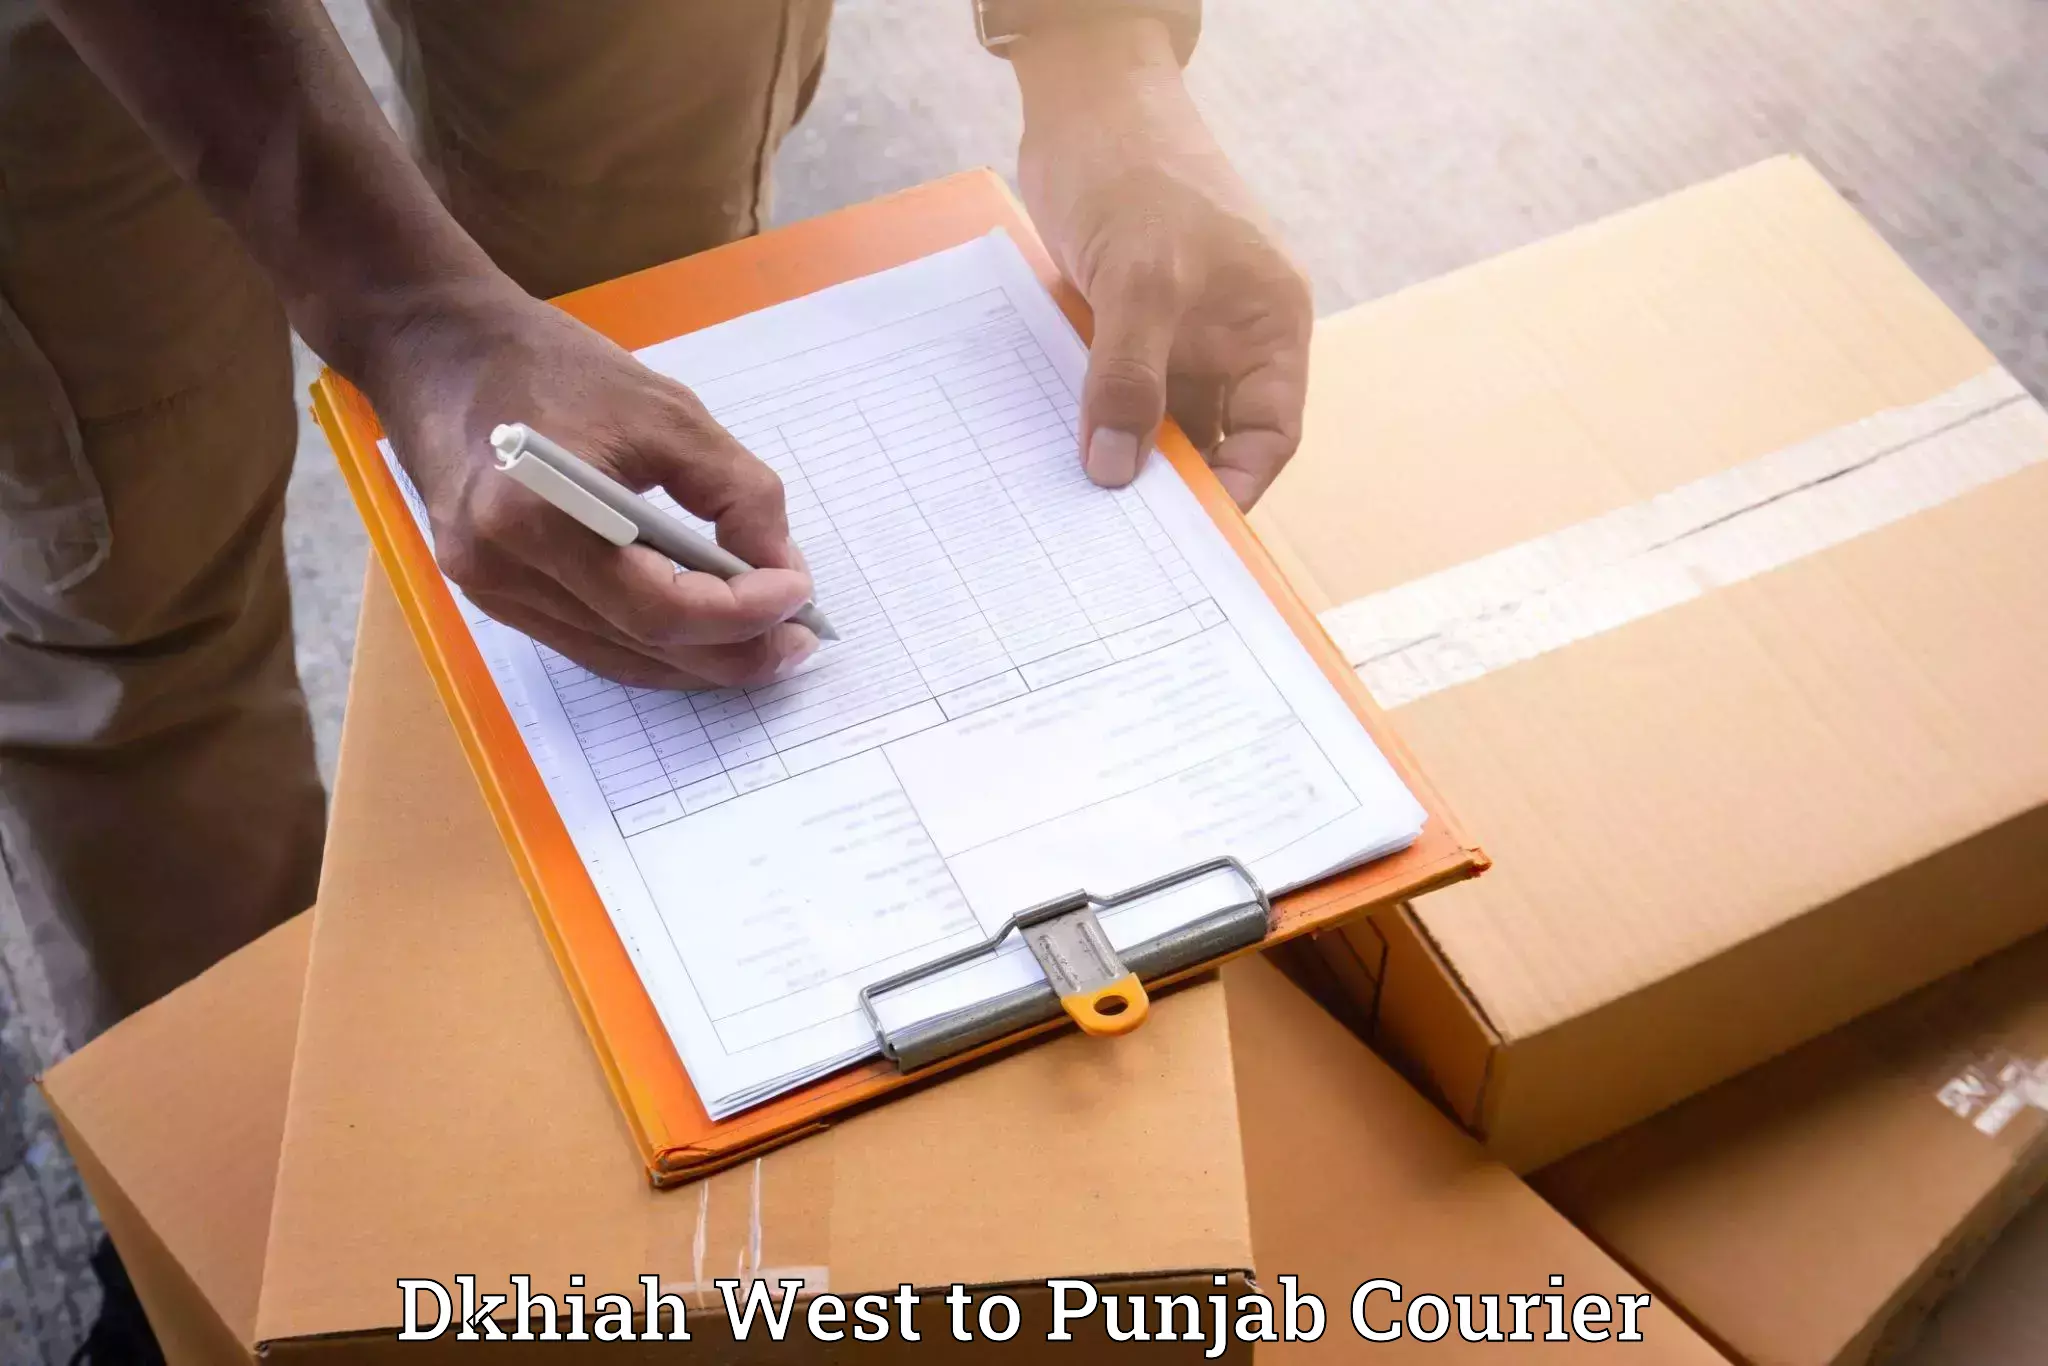 Furniture transport company Dkhiah West to Ludhiana